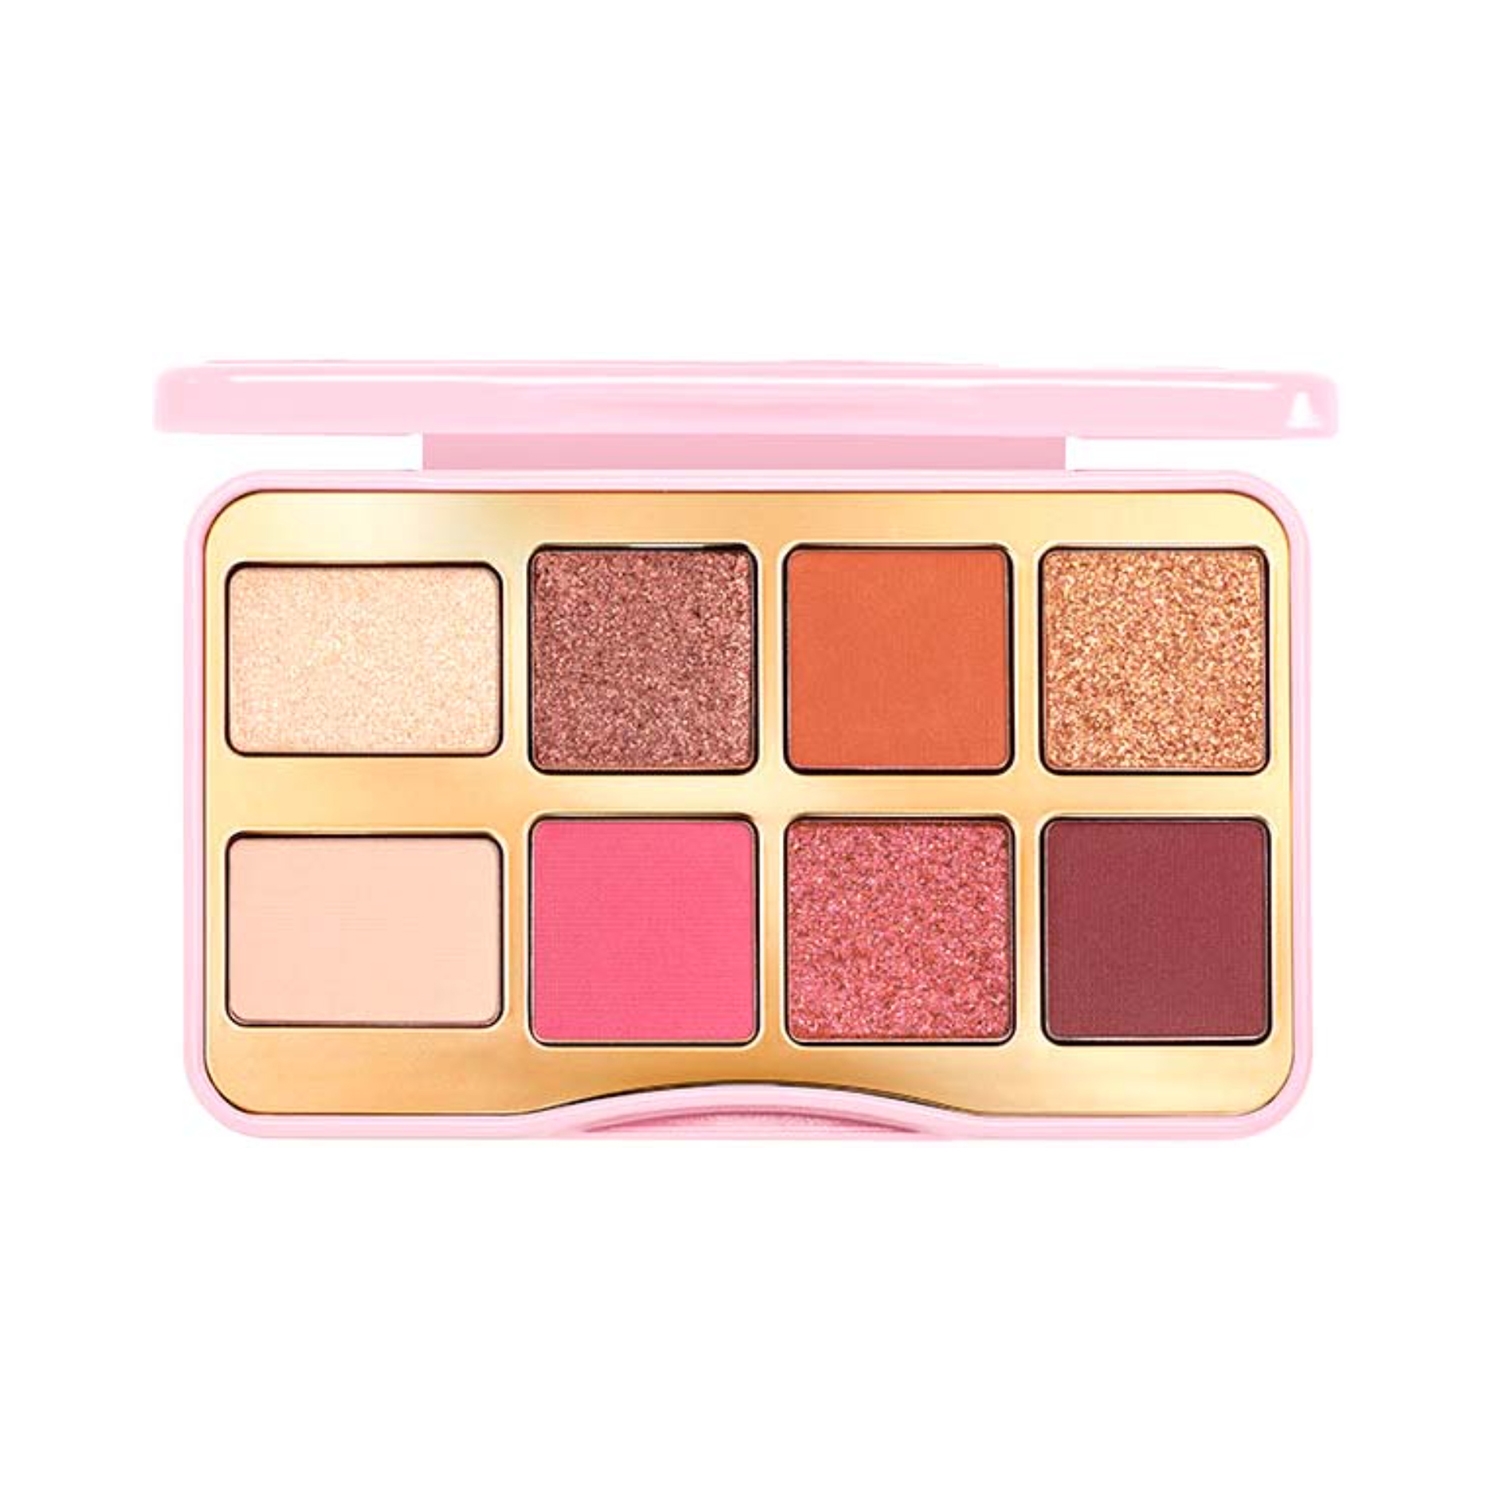 Too Faced | Too Faced Let’s Play Eye Palette - Multi-Color (6.7g)